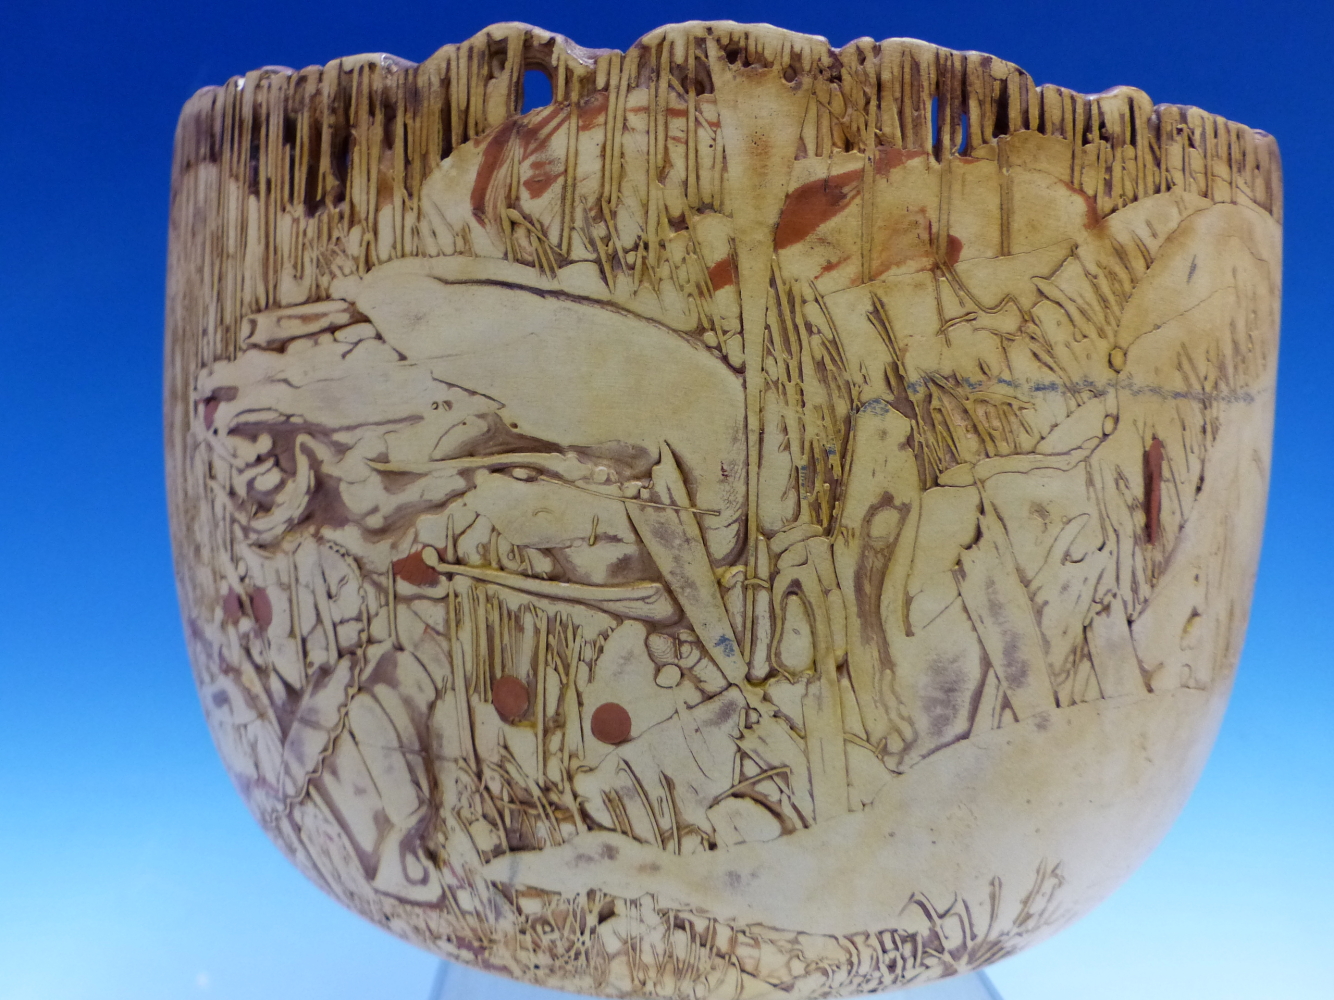 A STUDIO POTTERY BOWL BUILT OF DRIPS AND BLOCKS OF BEIGE SLIPS WITH TERRACOTTA RED INCLUSIONS, THE - Image 4 of 5